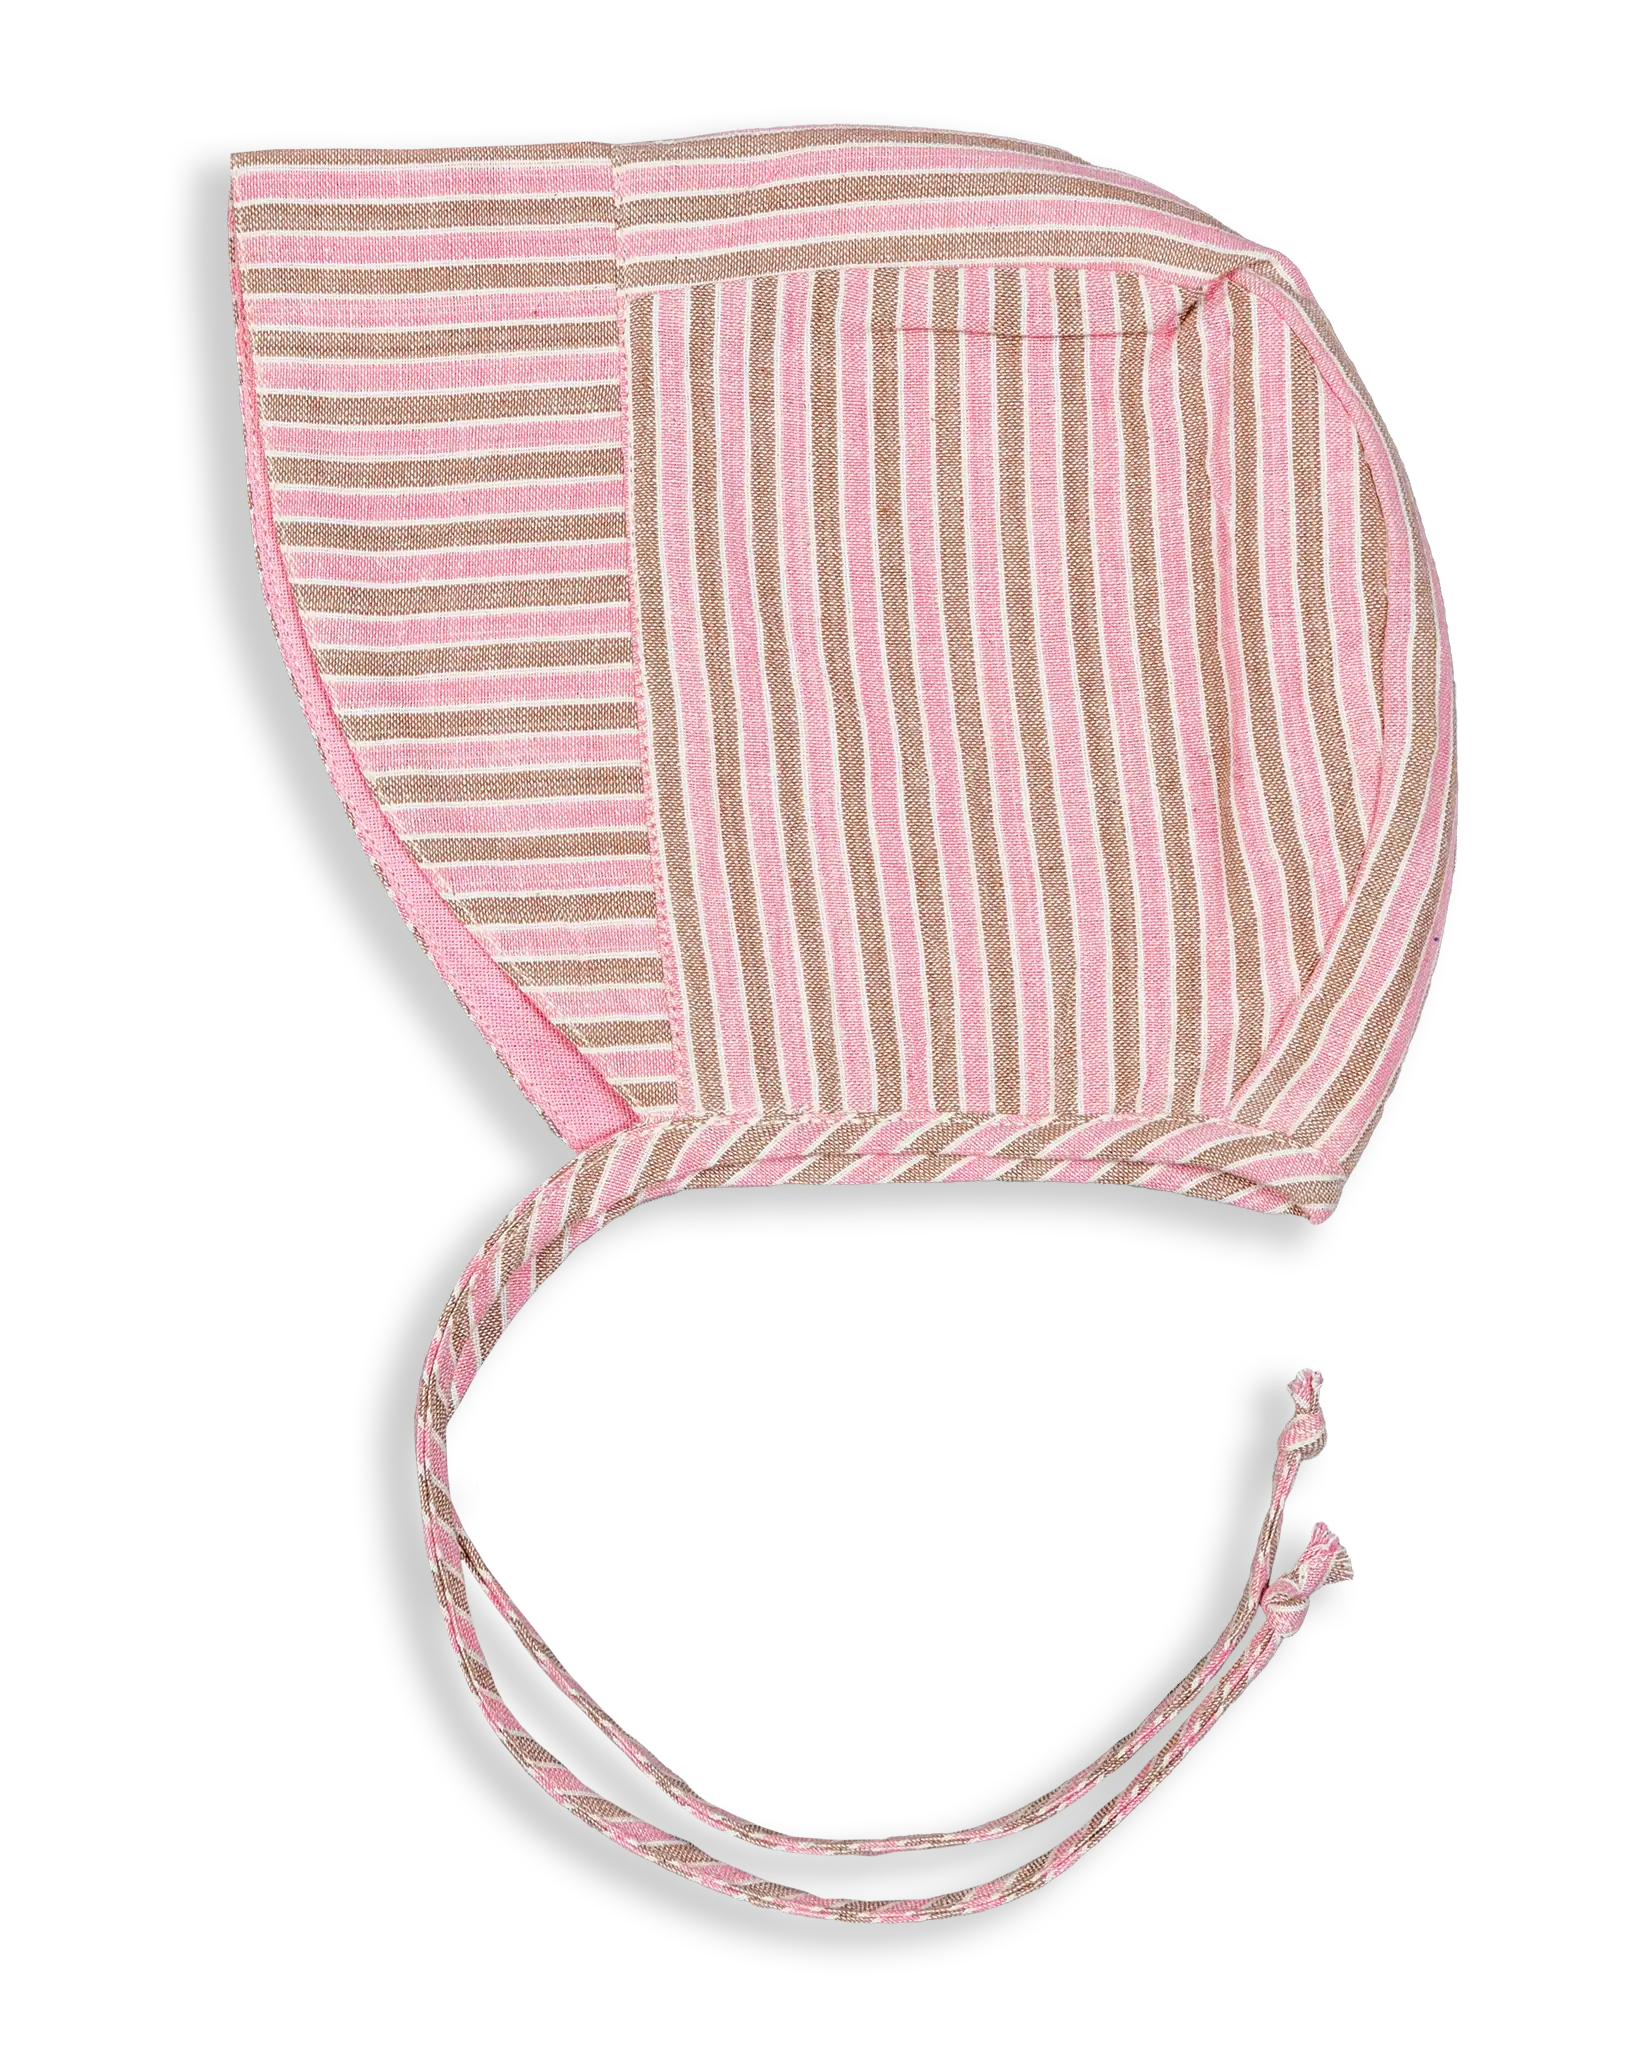 This Visor Bonnet comes with Visor to protect your baby from the sun. Our signature striped woven cotton is lined with plain-woven fabric in either blue or pink shades.